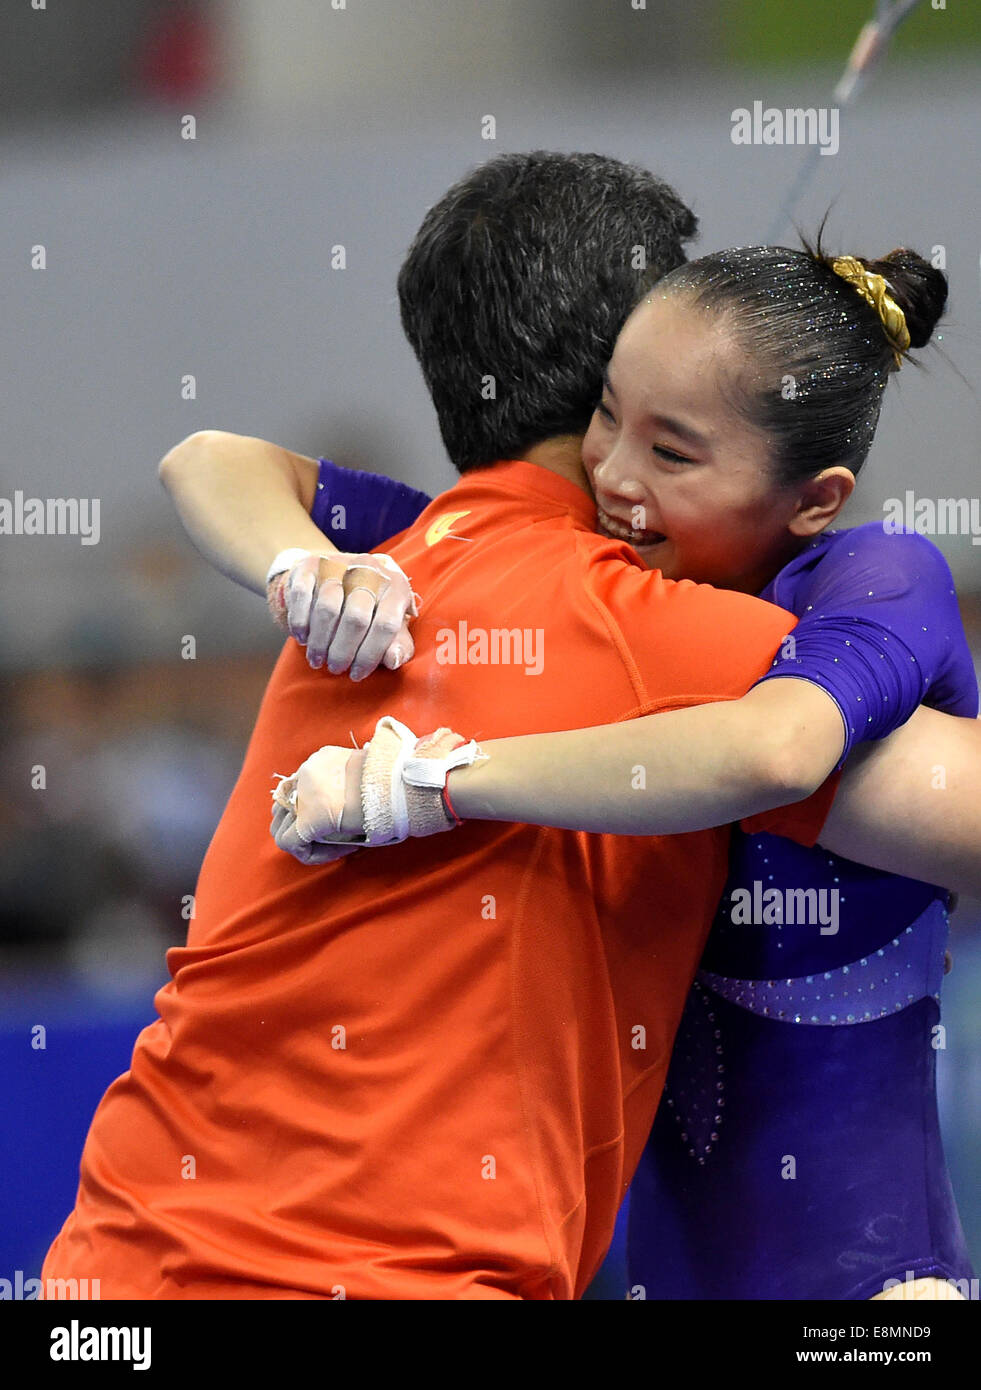 Nanning, China's Guangxi Zhuang Autonomous Region. 11th Oct, 2014. Yao Jinnan (R) of China celebrates with her coach after her performance on the uneven bars during the women's individual apparatus finals of the 45th Gymnastics World Championships in Nanning, capital of south China's Guangxi Zhuang Autonomous Region, Oct. 11, 2014. Yao Jinnan won the gold medal in the women's uneven bars final with 15.633 points. Credit:  Liang Xu/Xinhua/Alamy Live News Stock Photo